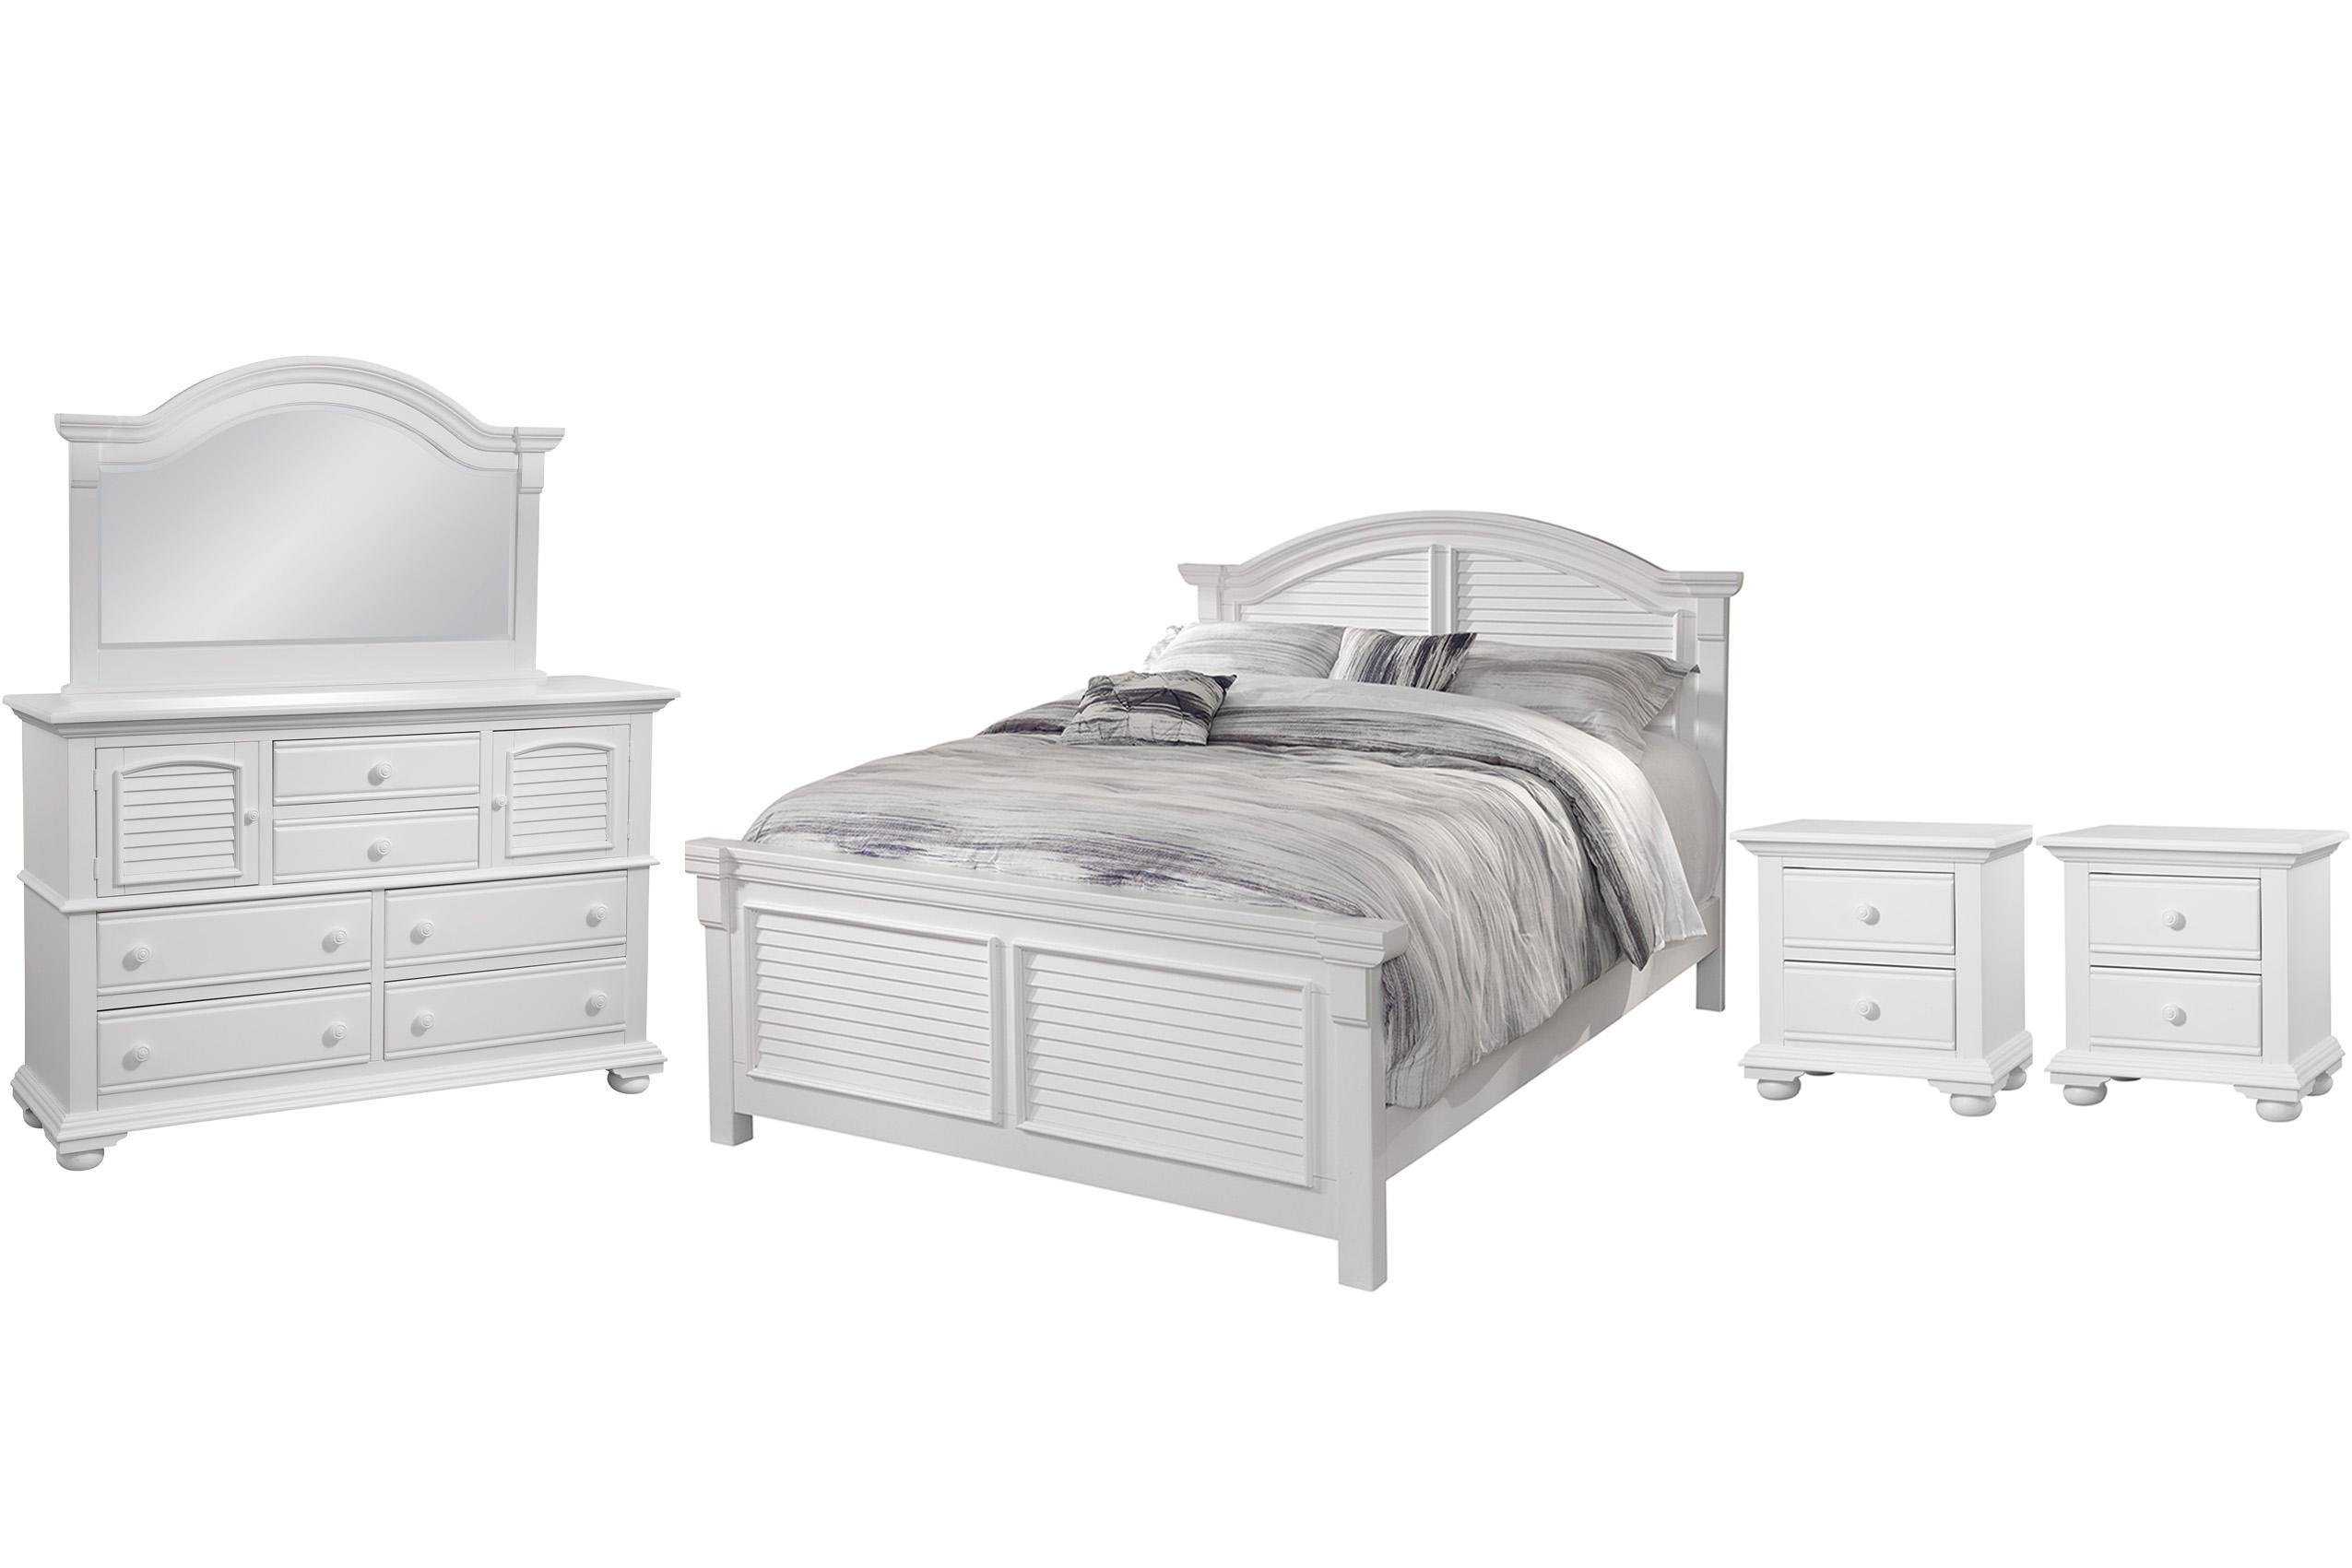 Classic, Traditional, Cottage Panel Bedroom Set COTTAGE 6510-50PAN 6510-50PAN-2NDM-5PC in White 